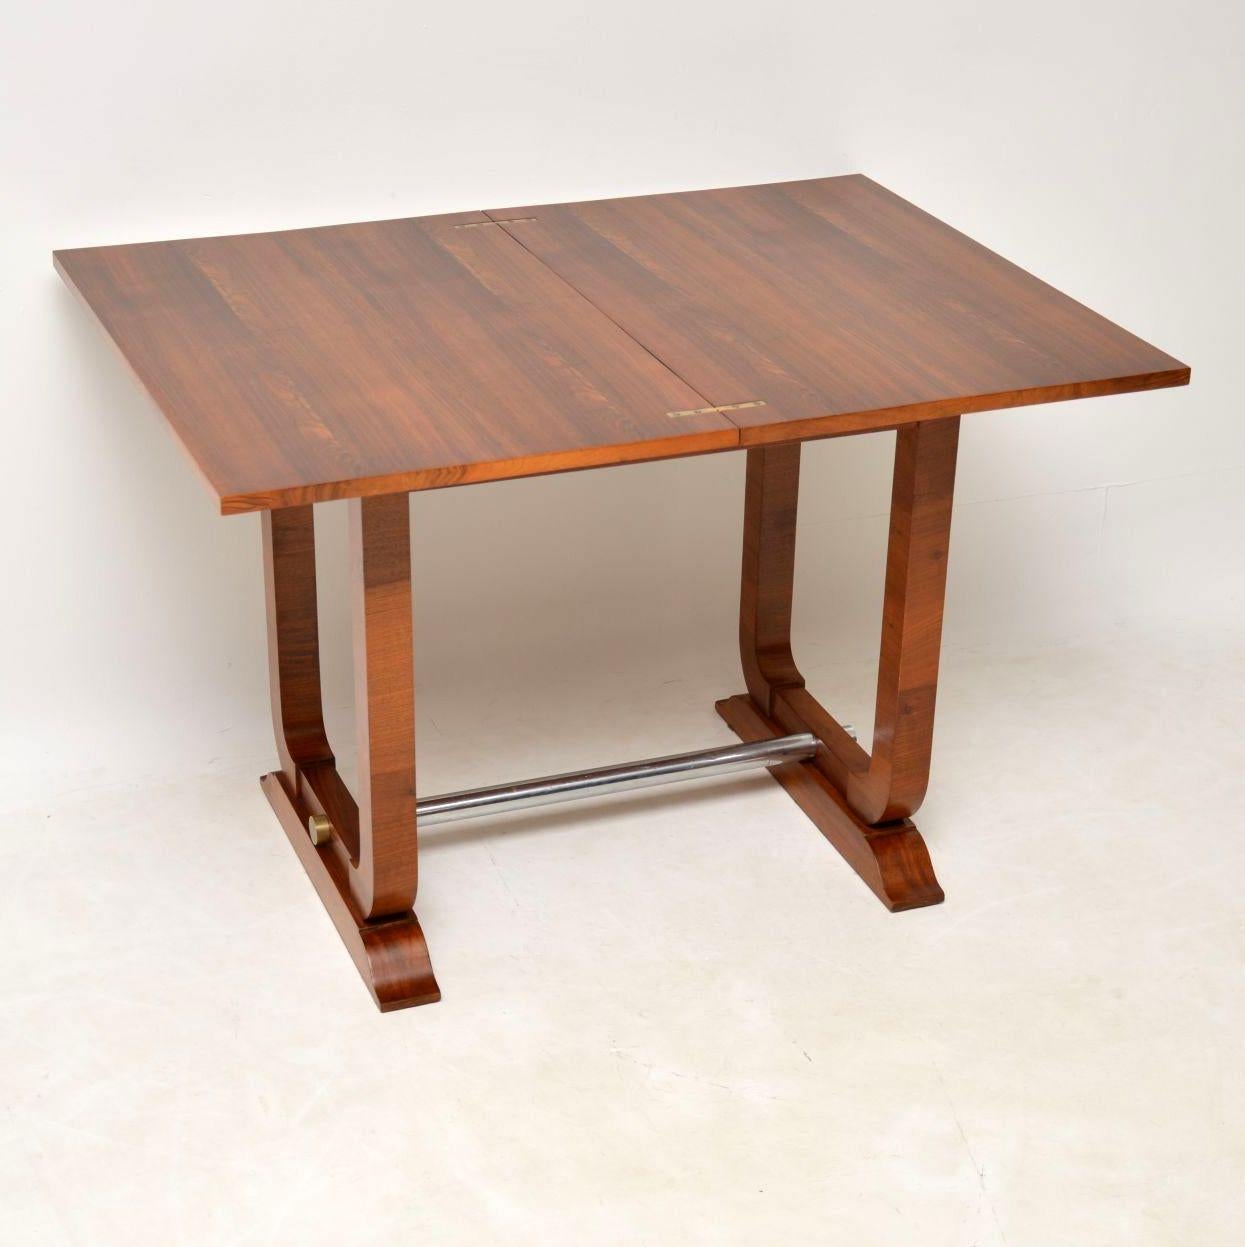 1920s, Art Deco Vintage Walnut Card Table / Side Table (Englisch)